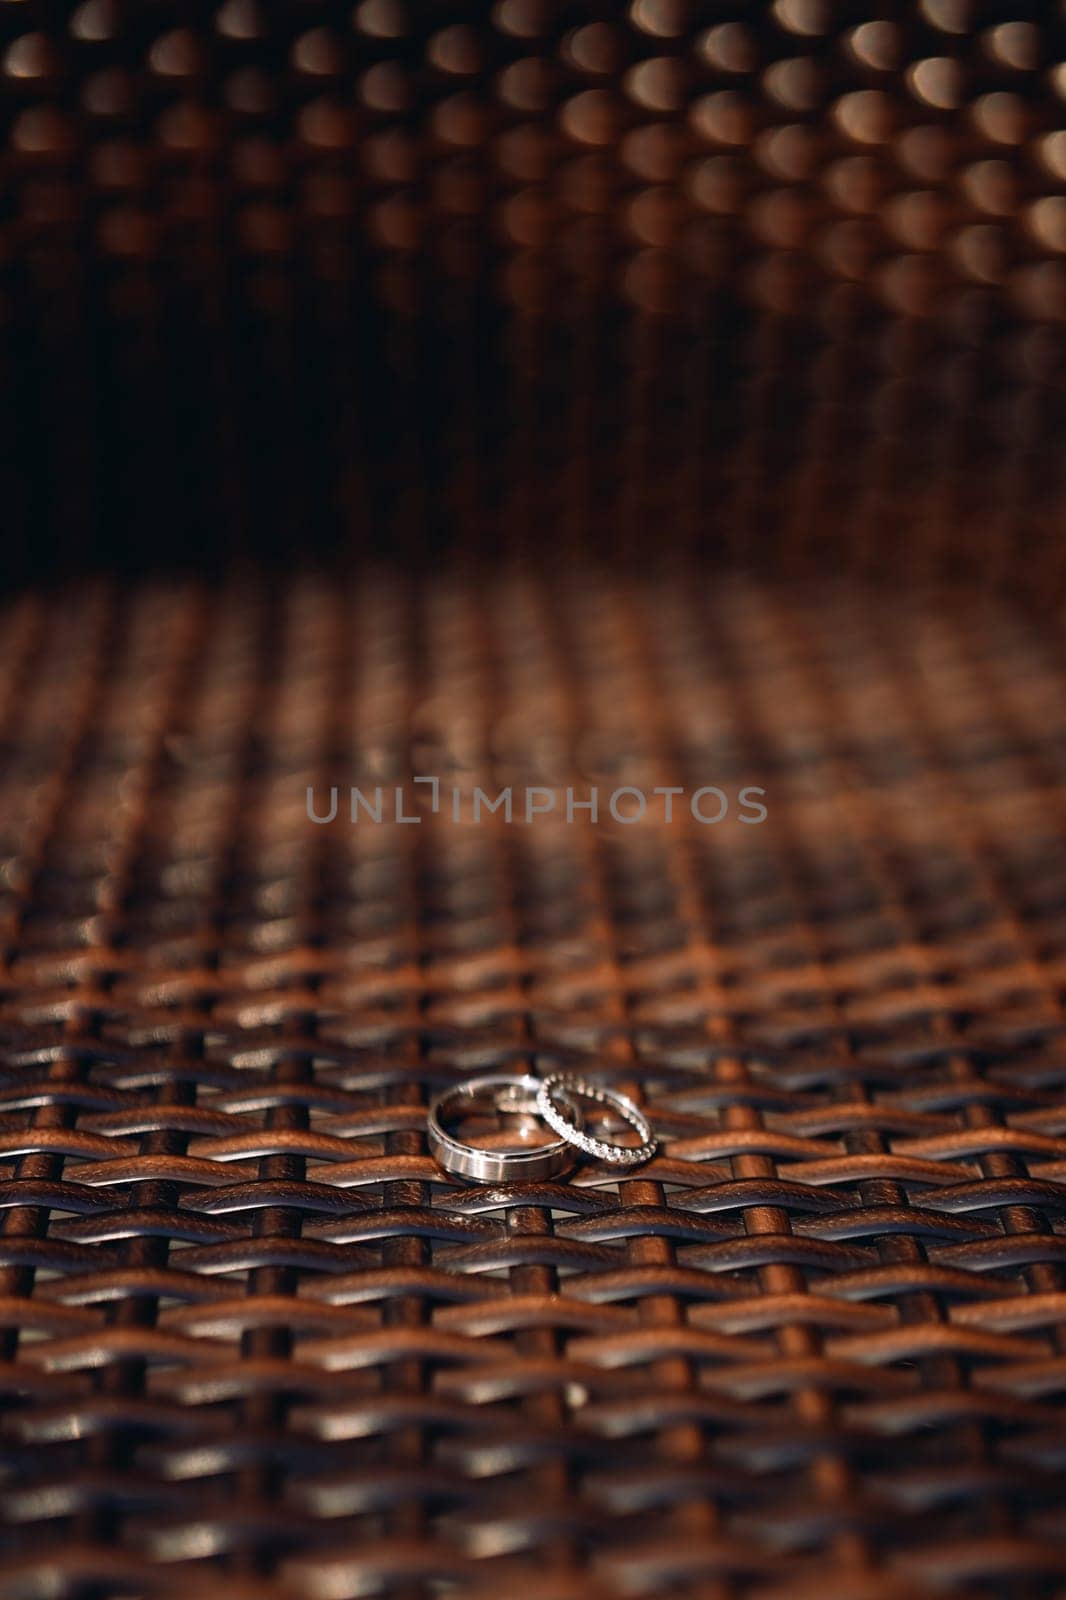 Wedding rings lie on a brown wicker chair by Nadtochiy